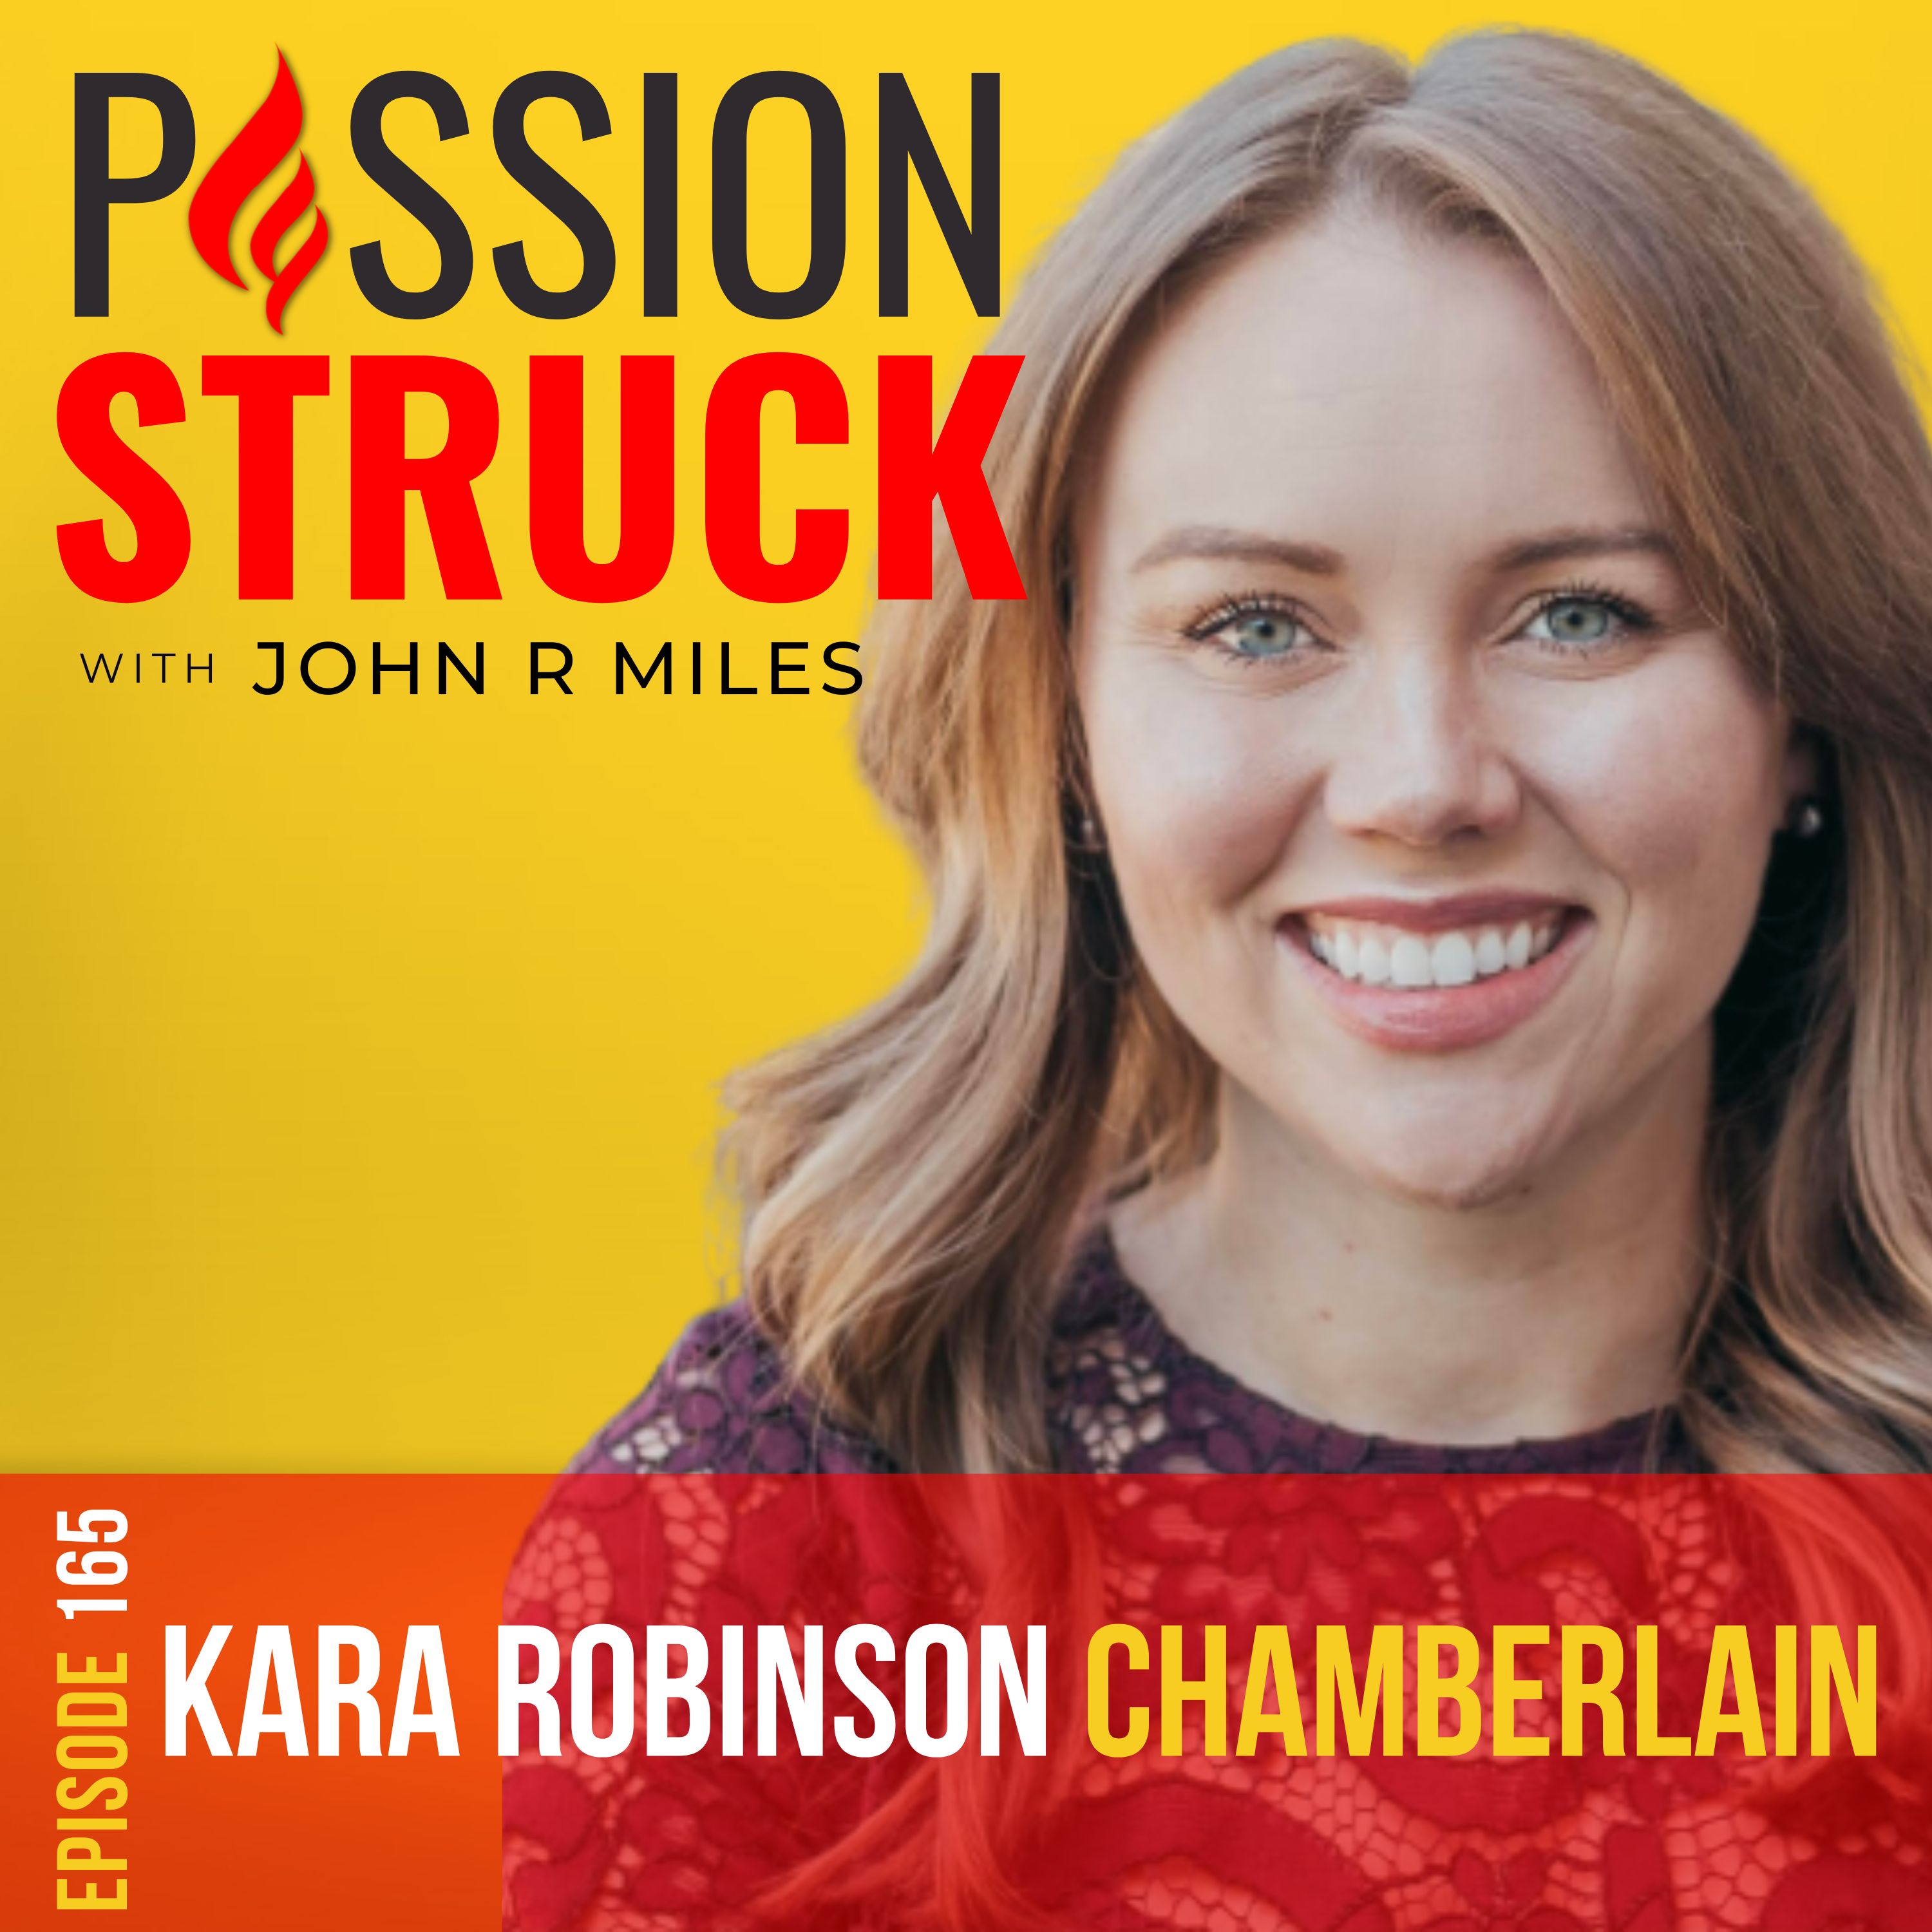 Passion Struck with John R. Miles thumbnail for episode 165 featuring Kara Robinson Chamberlain